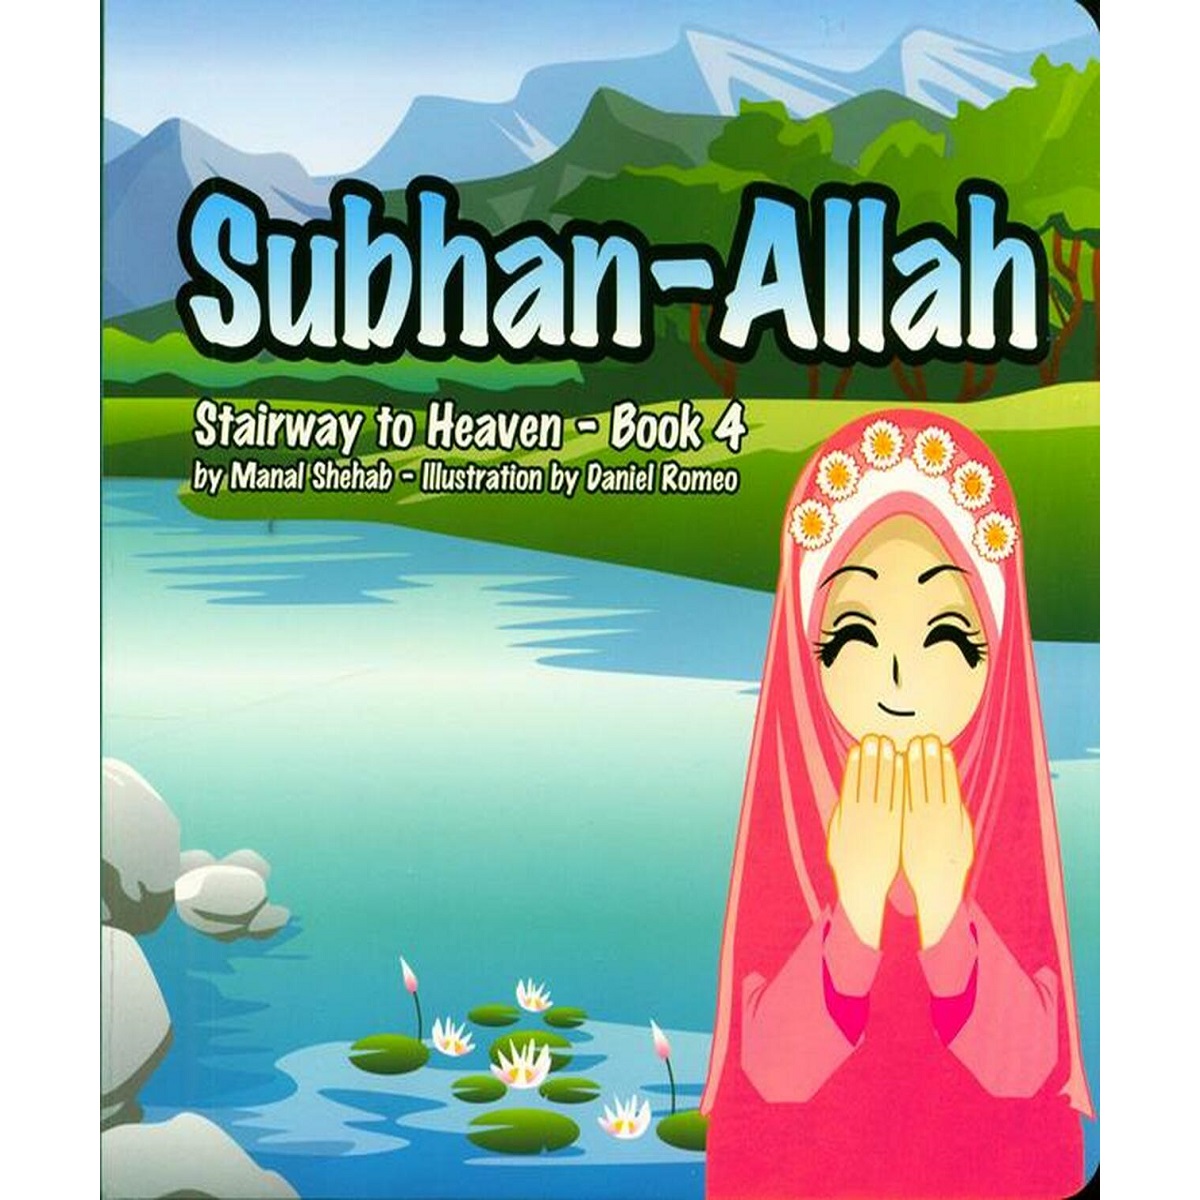 Subhan-Allah - Book 4 (Stairway to Heaven)